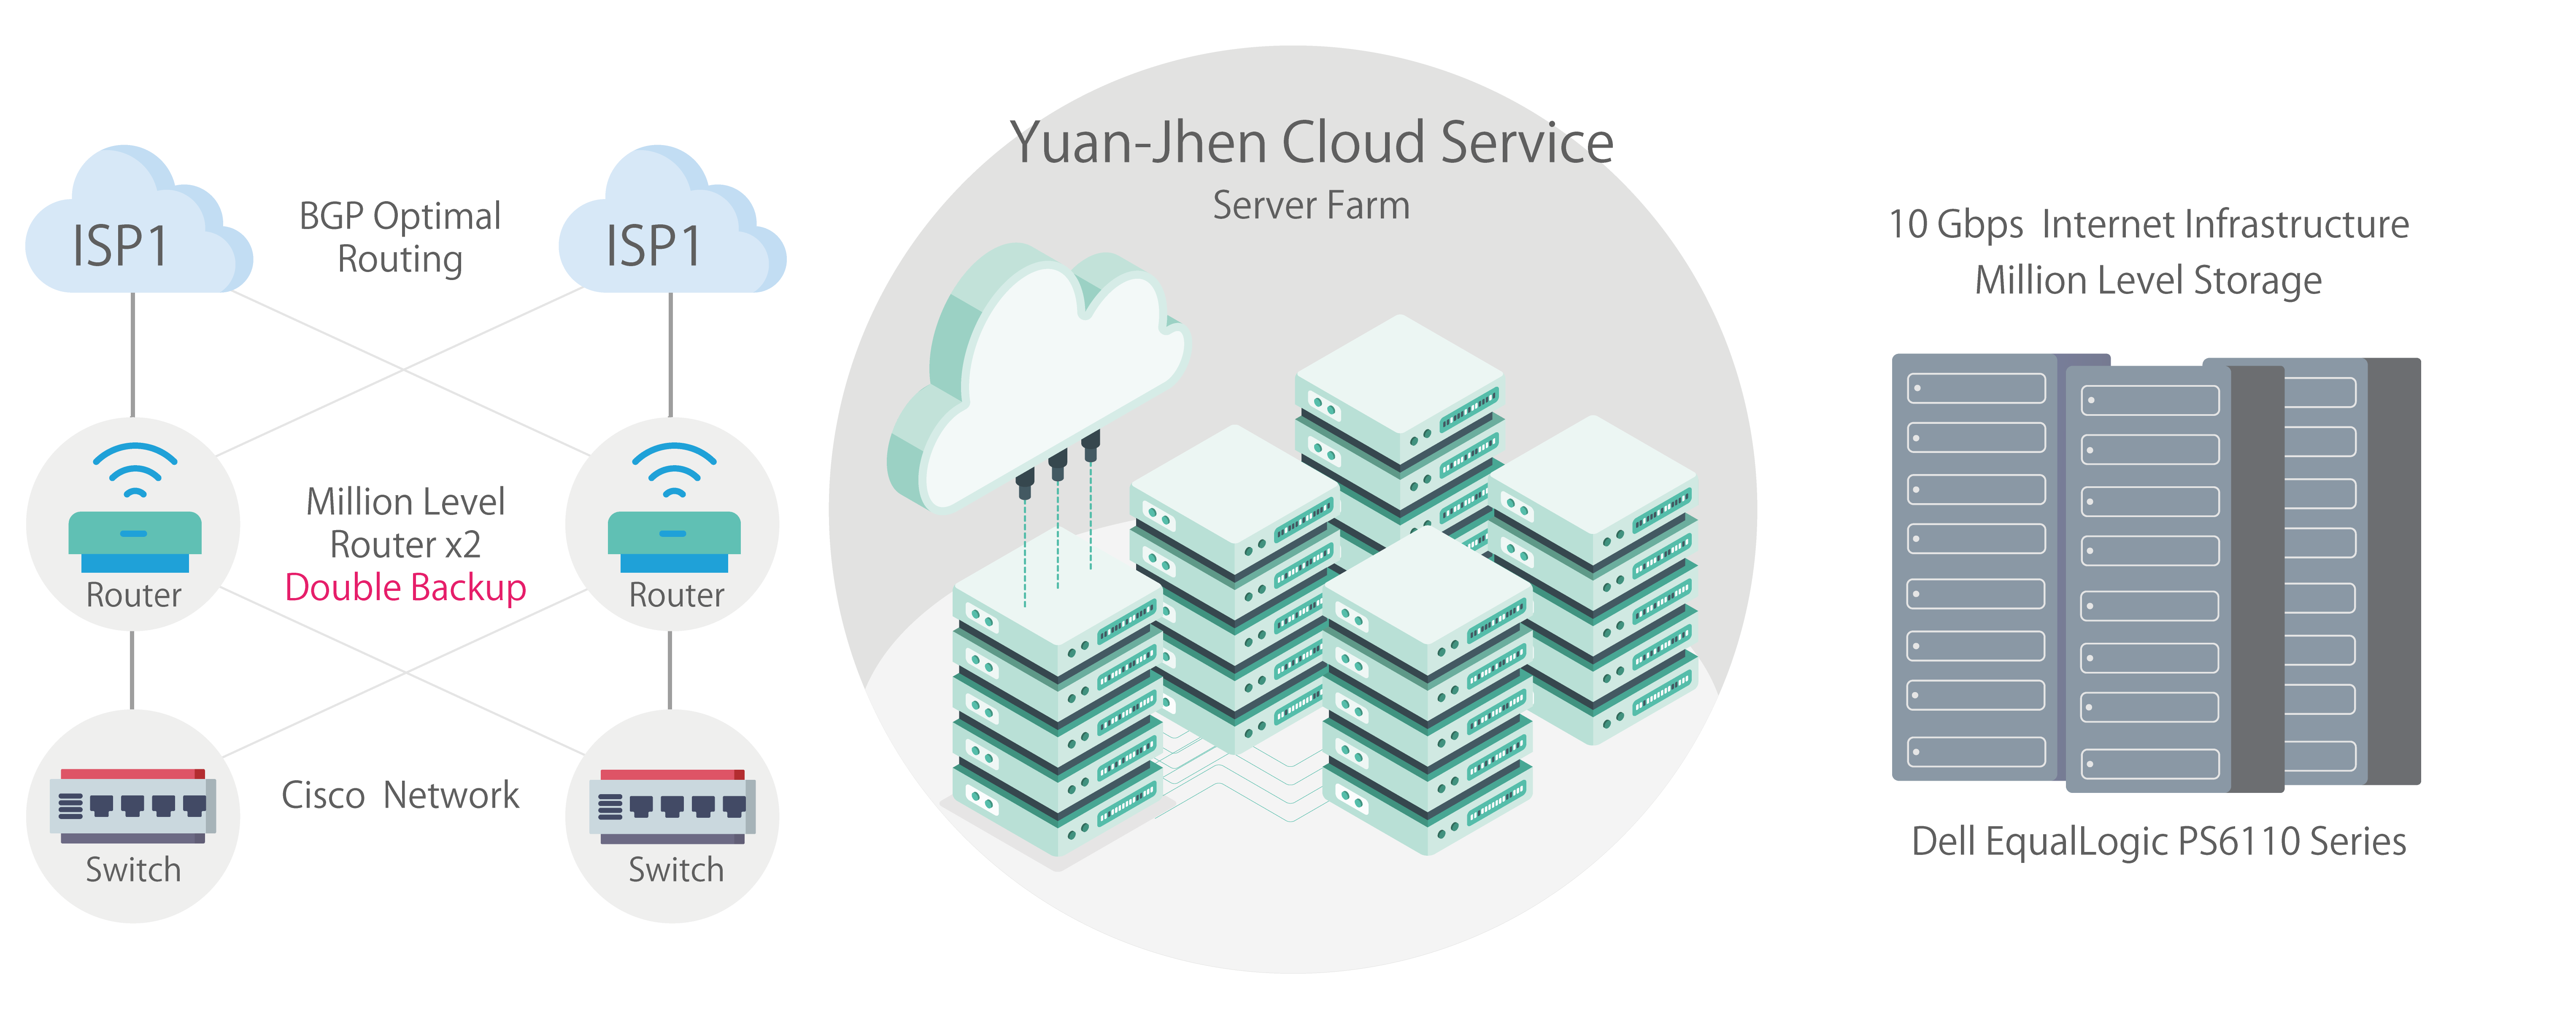 Introduction of Cloud Infrastructure｜Yuan-Jhen